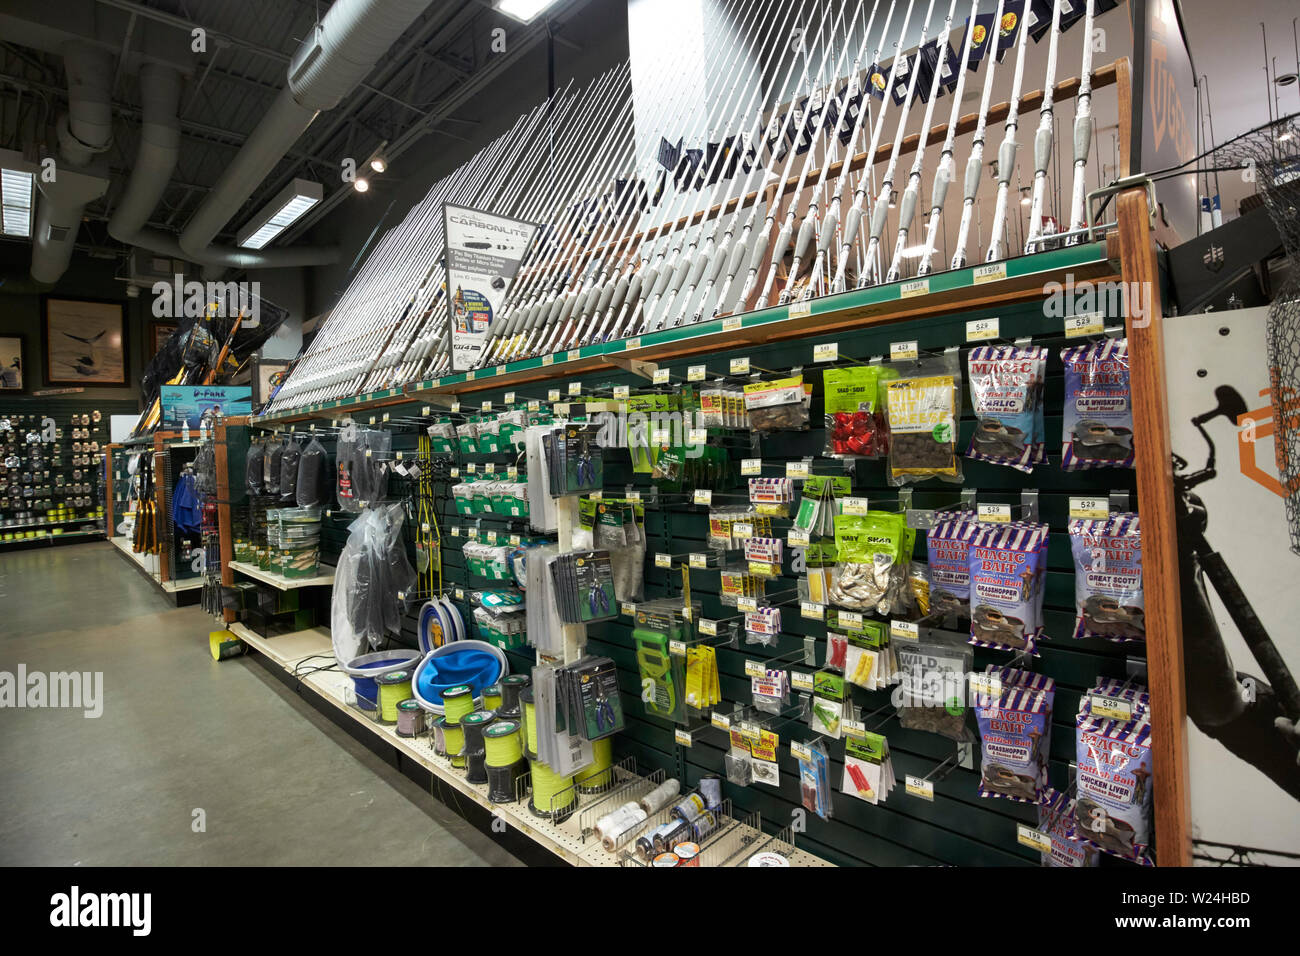 fishing rods and equipment on sale in a bass pro shops retail